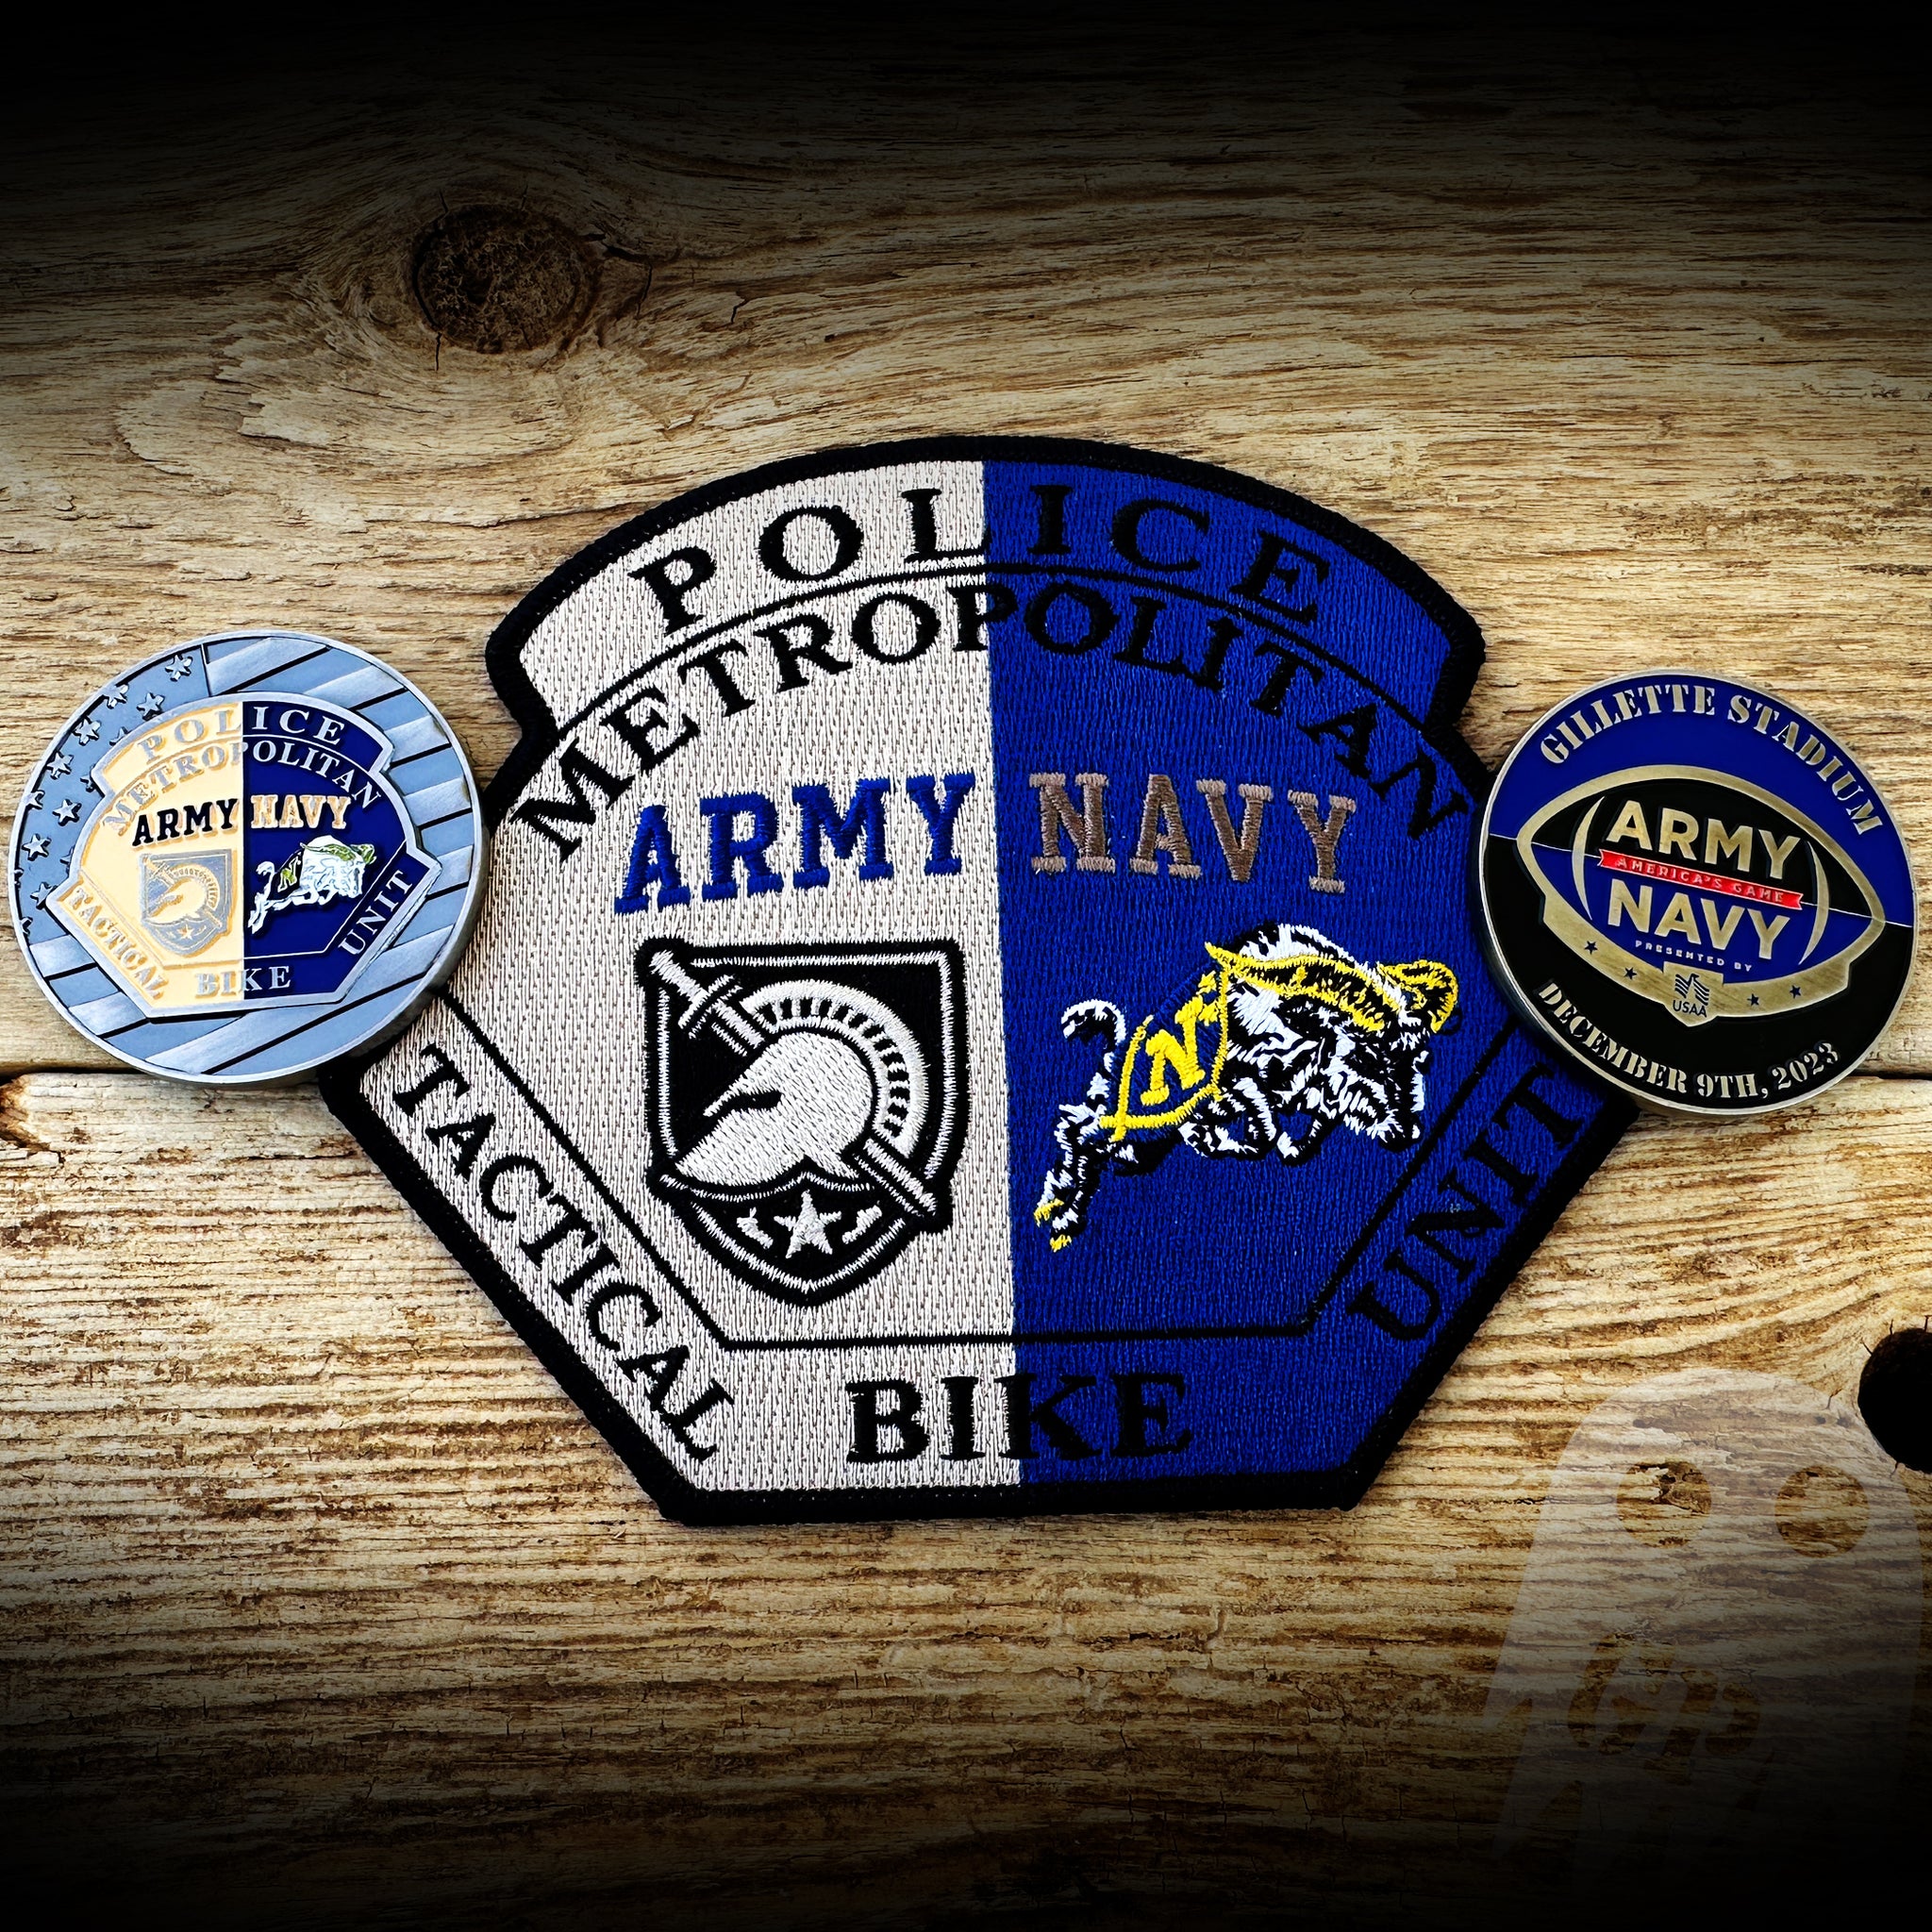 Army / Navy Game - Metrolec Tactical Bike Unit Patch & Coin